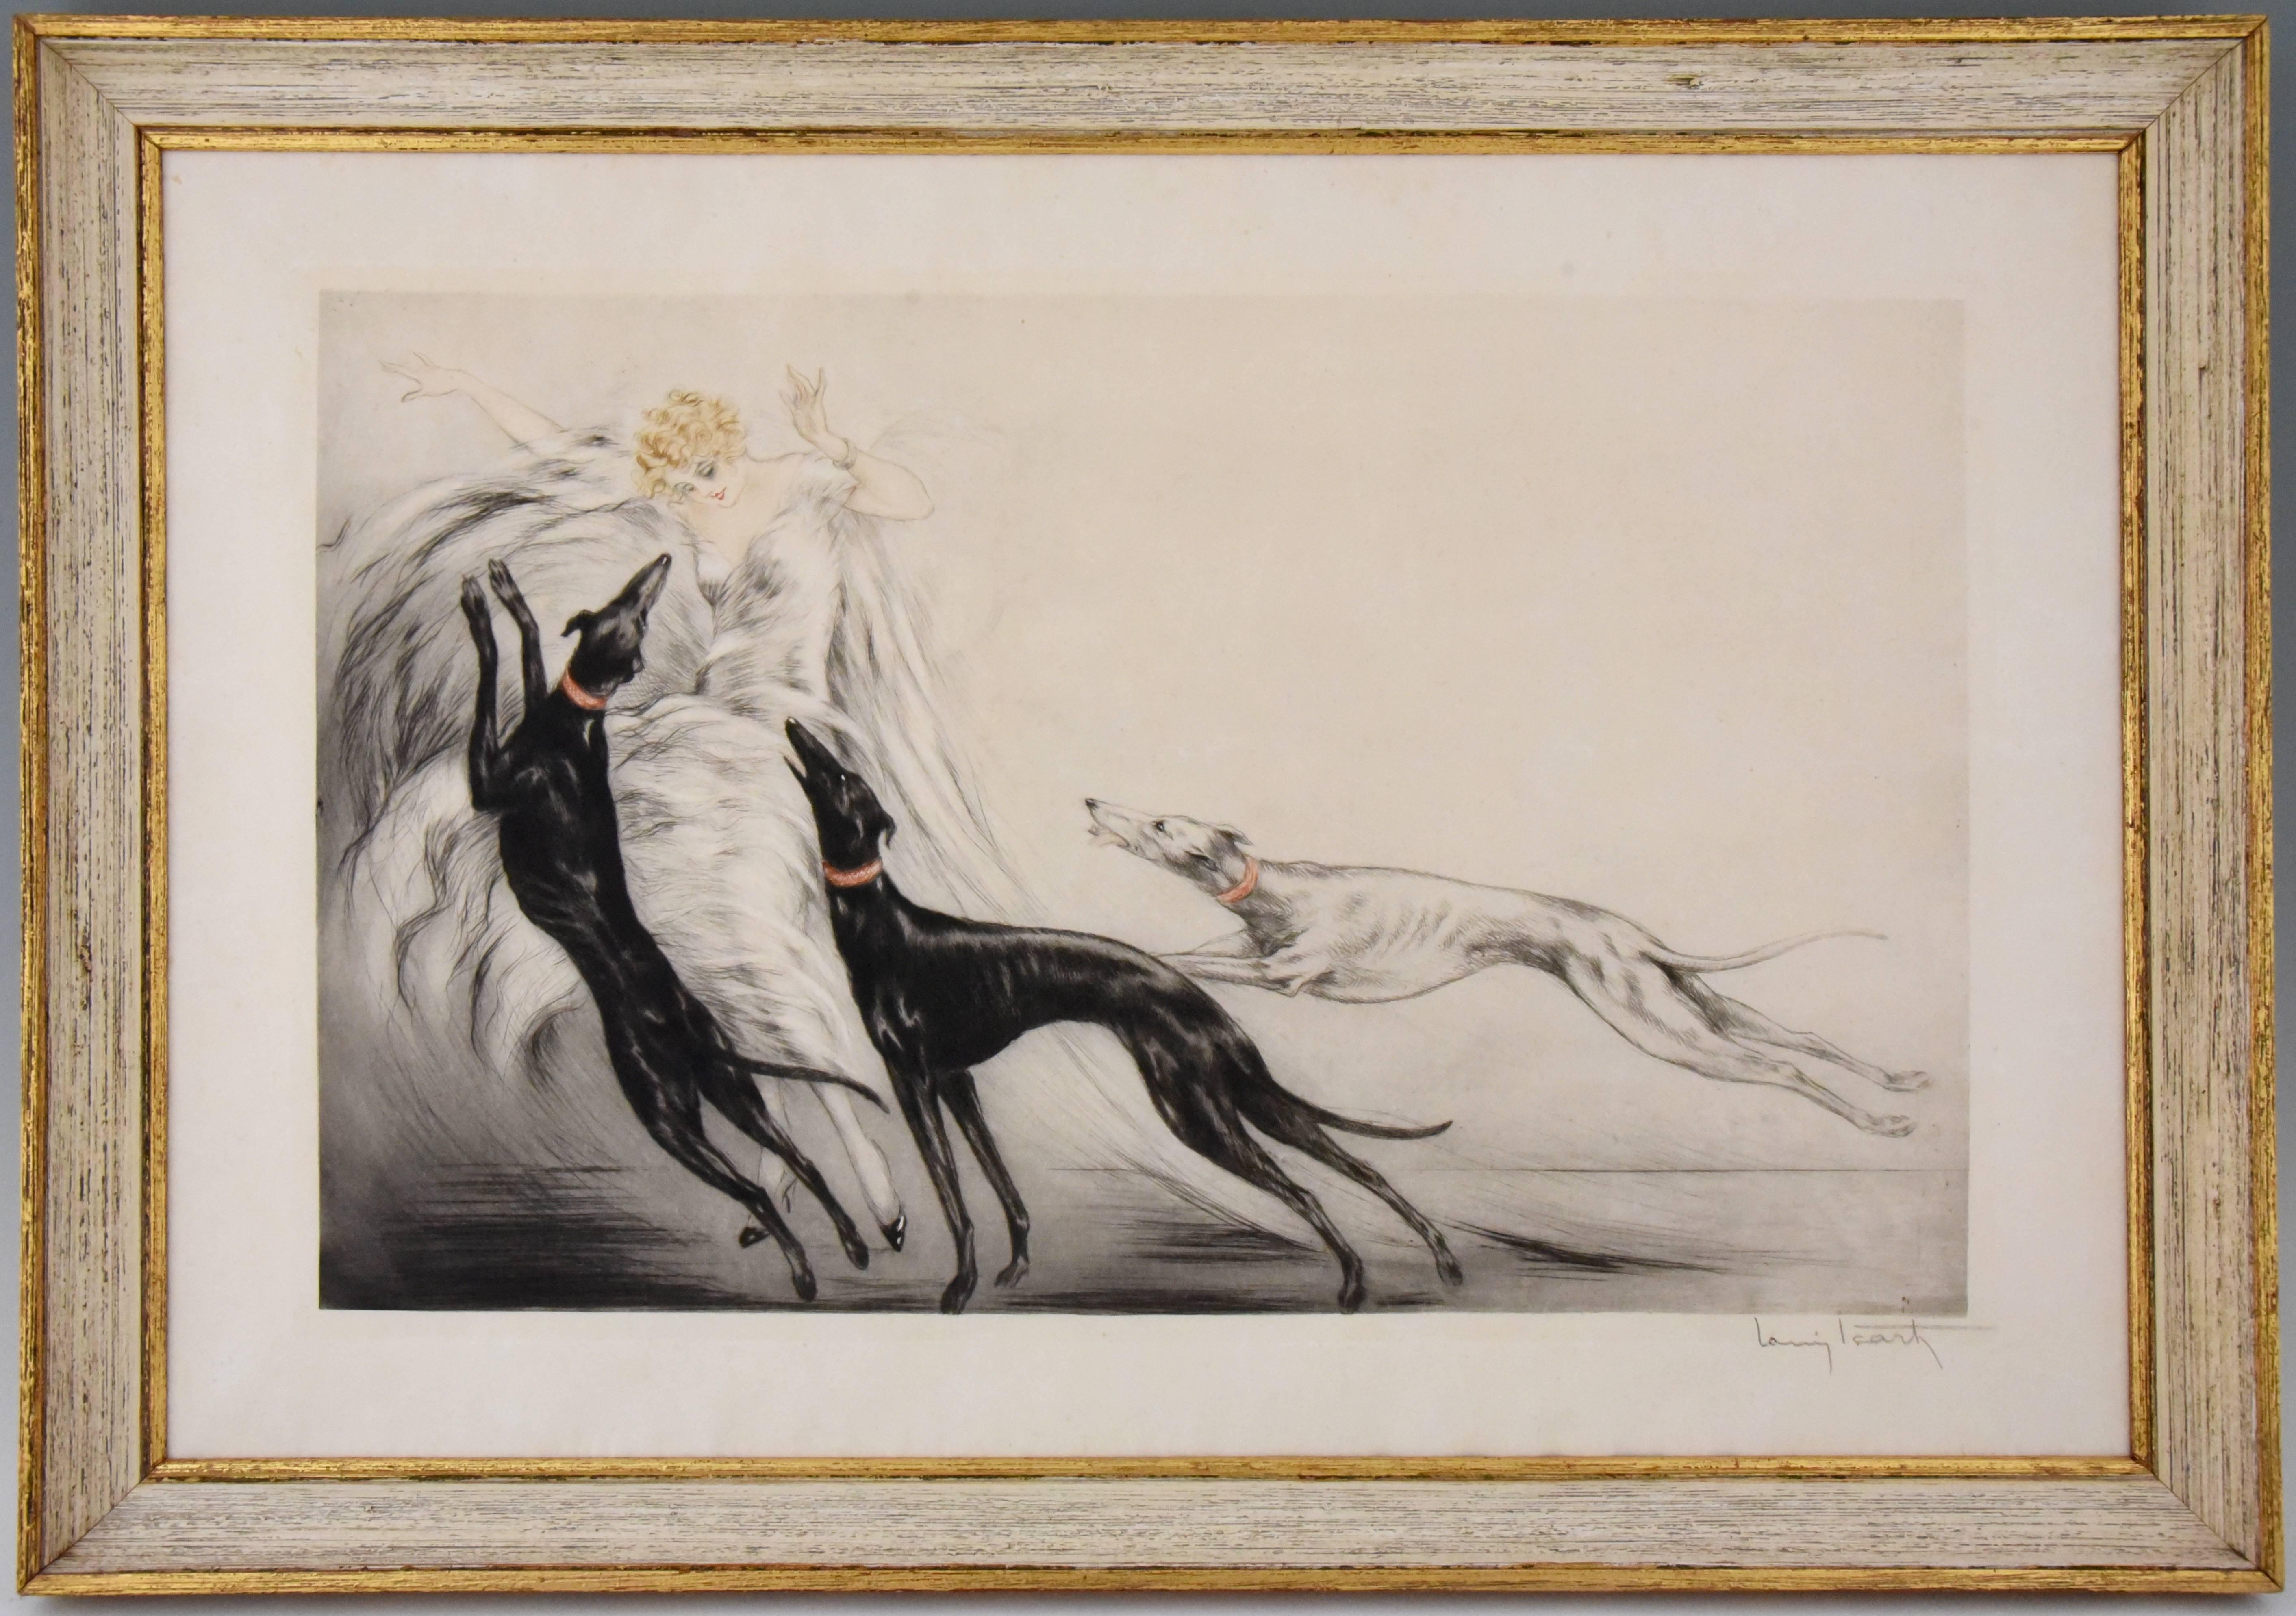 Original 1929 Art Deco etching of an elegant lady with her grey hound dogs, signed by Louis Icart with wind mill stamp. 

Material: Etching, drypoint and aquatint, printed with color and hand color. Framed.
Origin: France
Size: H. 58 cm. x L. 83